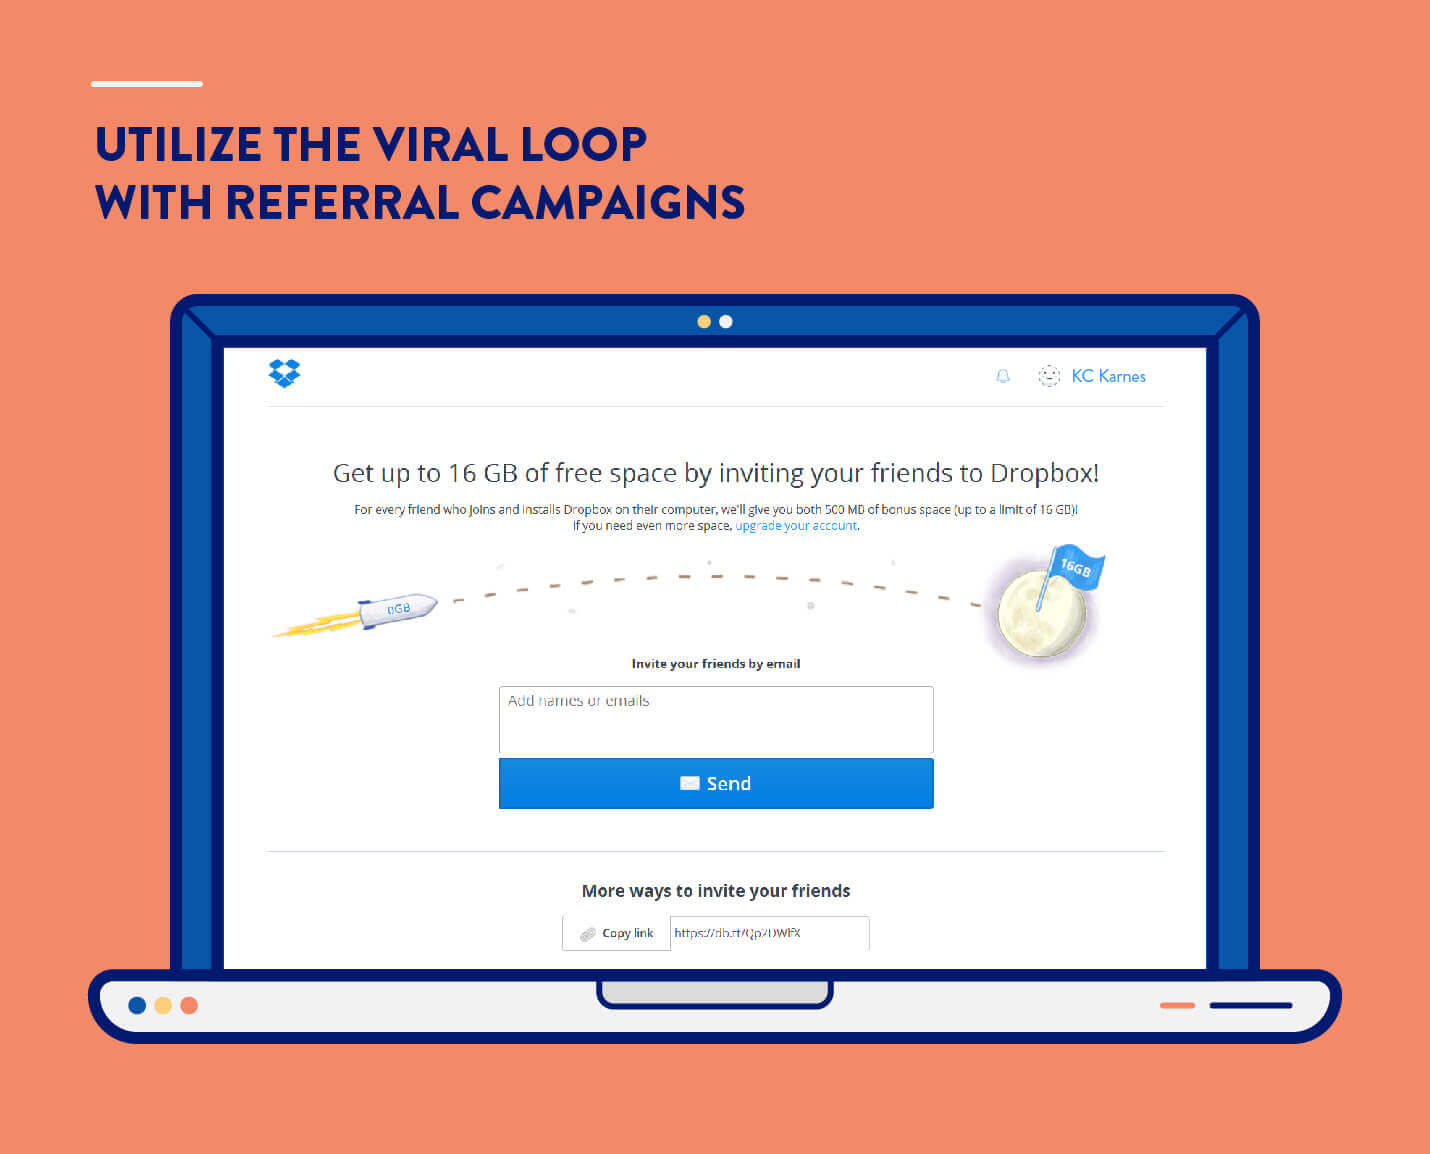 use referral campaigns to utilize the viral loop example from Dropbox